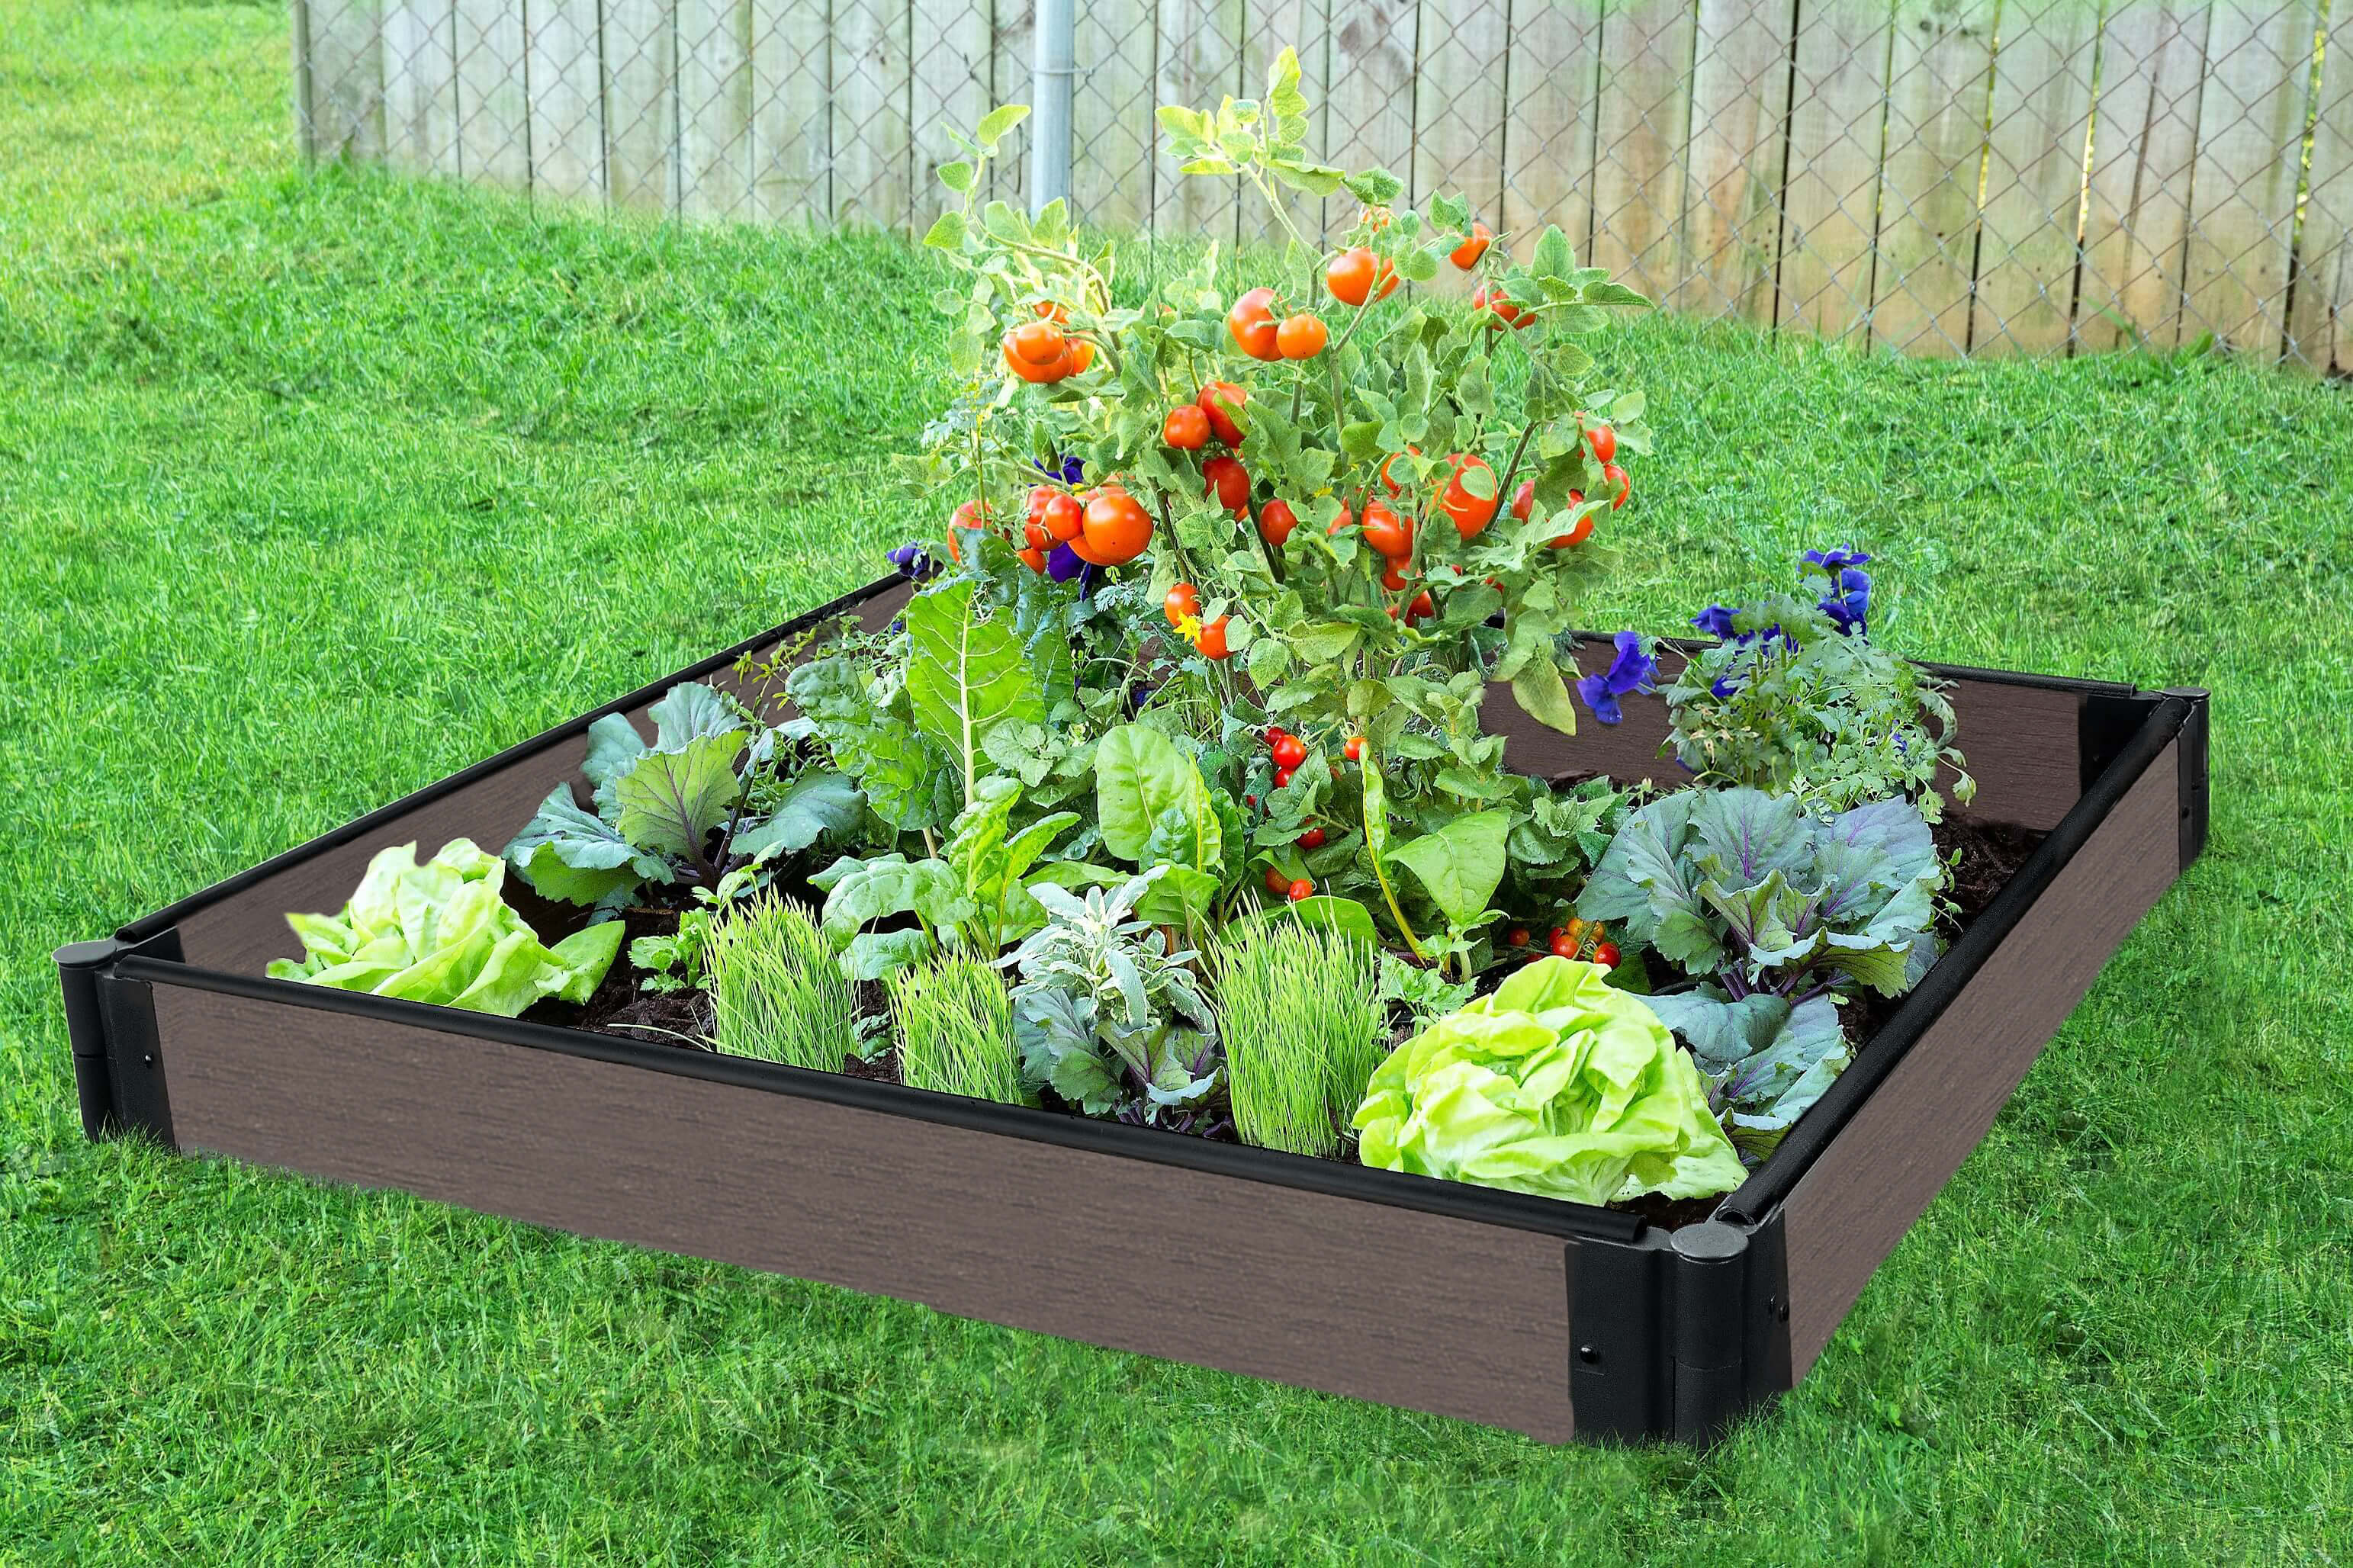 Frame It All Tool-Free Weathered Wood Raised Garden Bed 4' x 4' x 5.5" - 1" profile